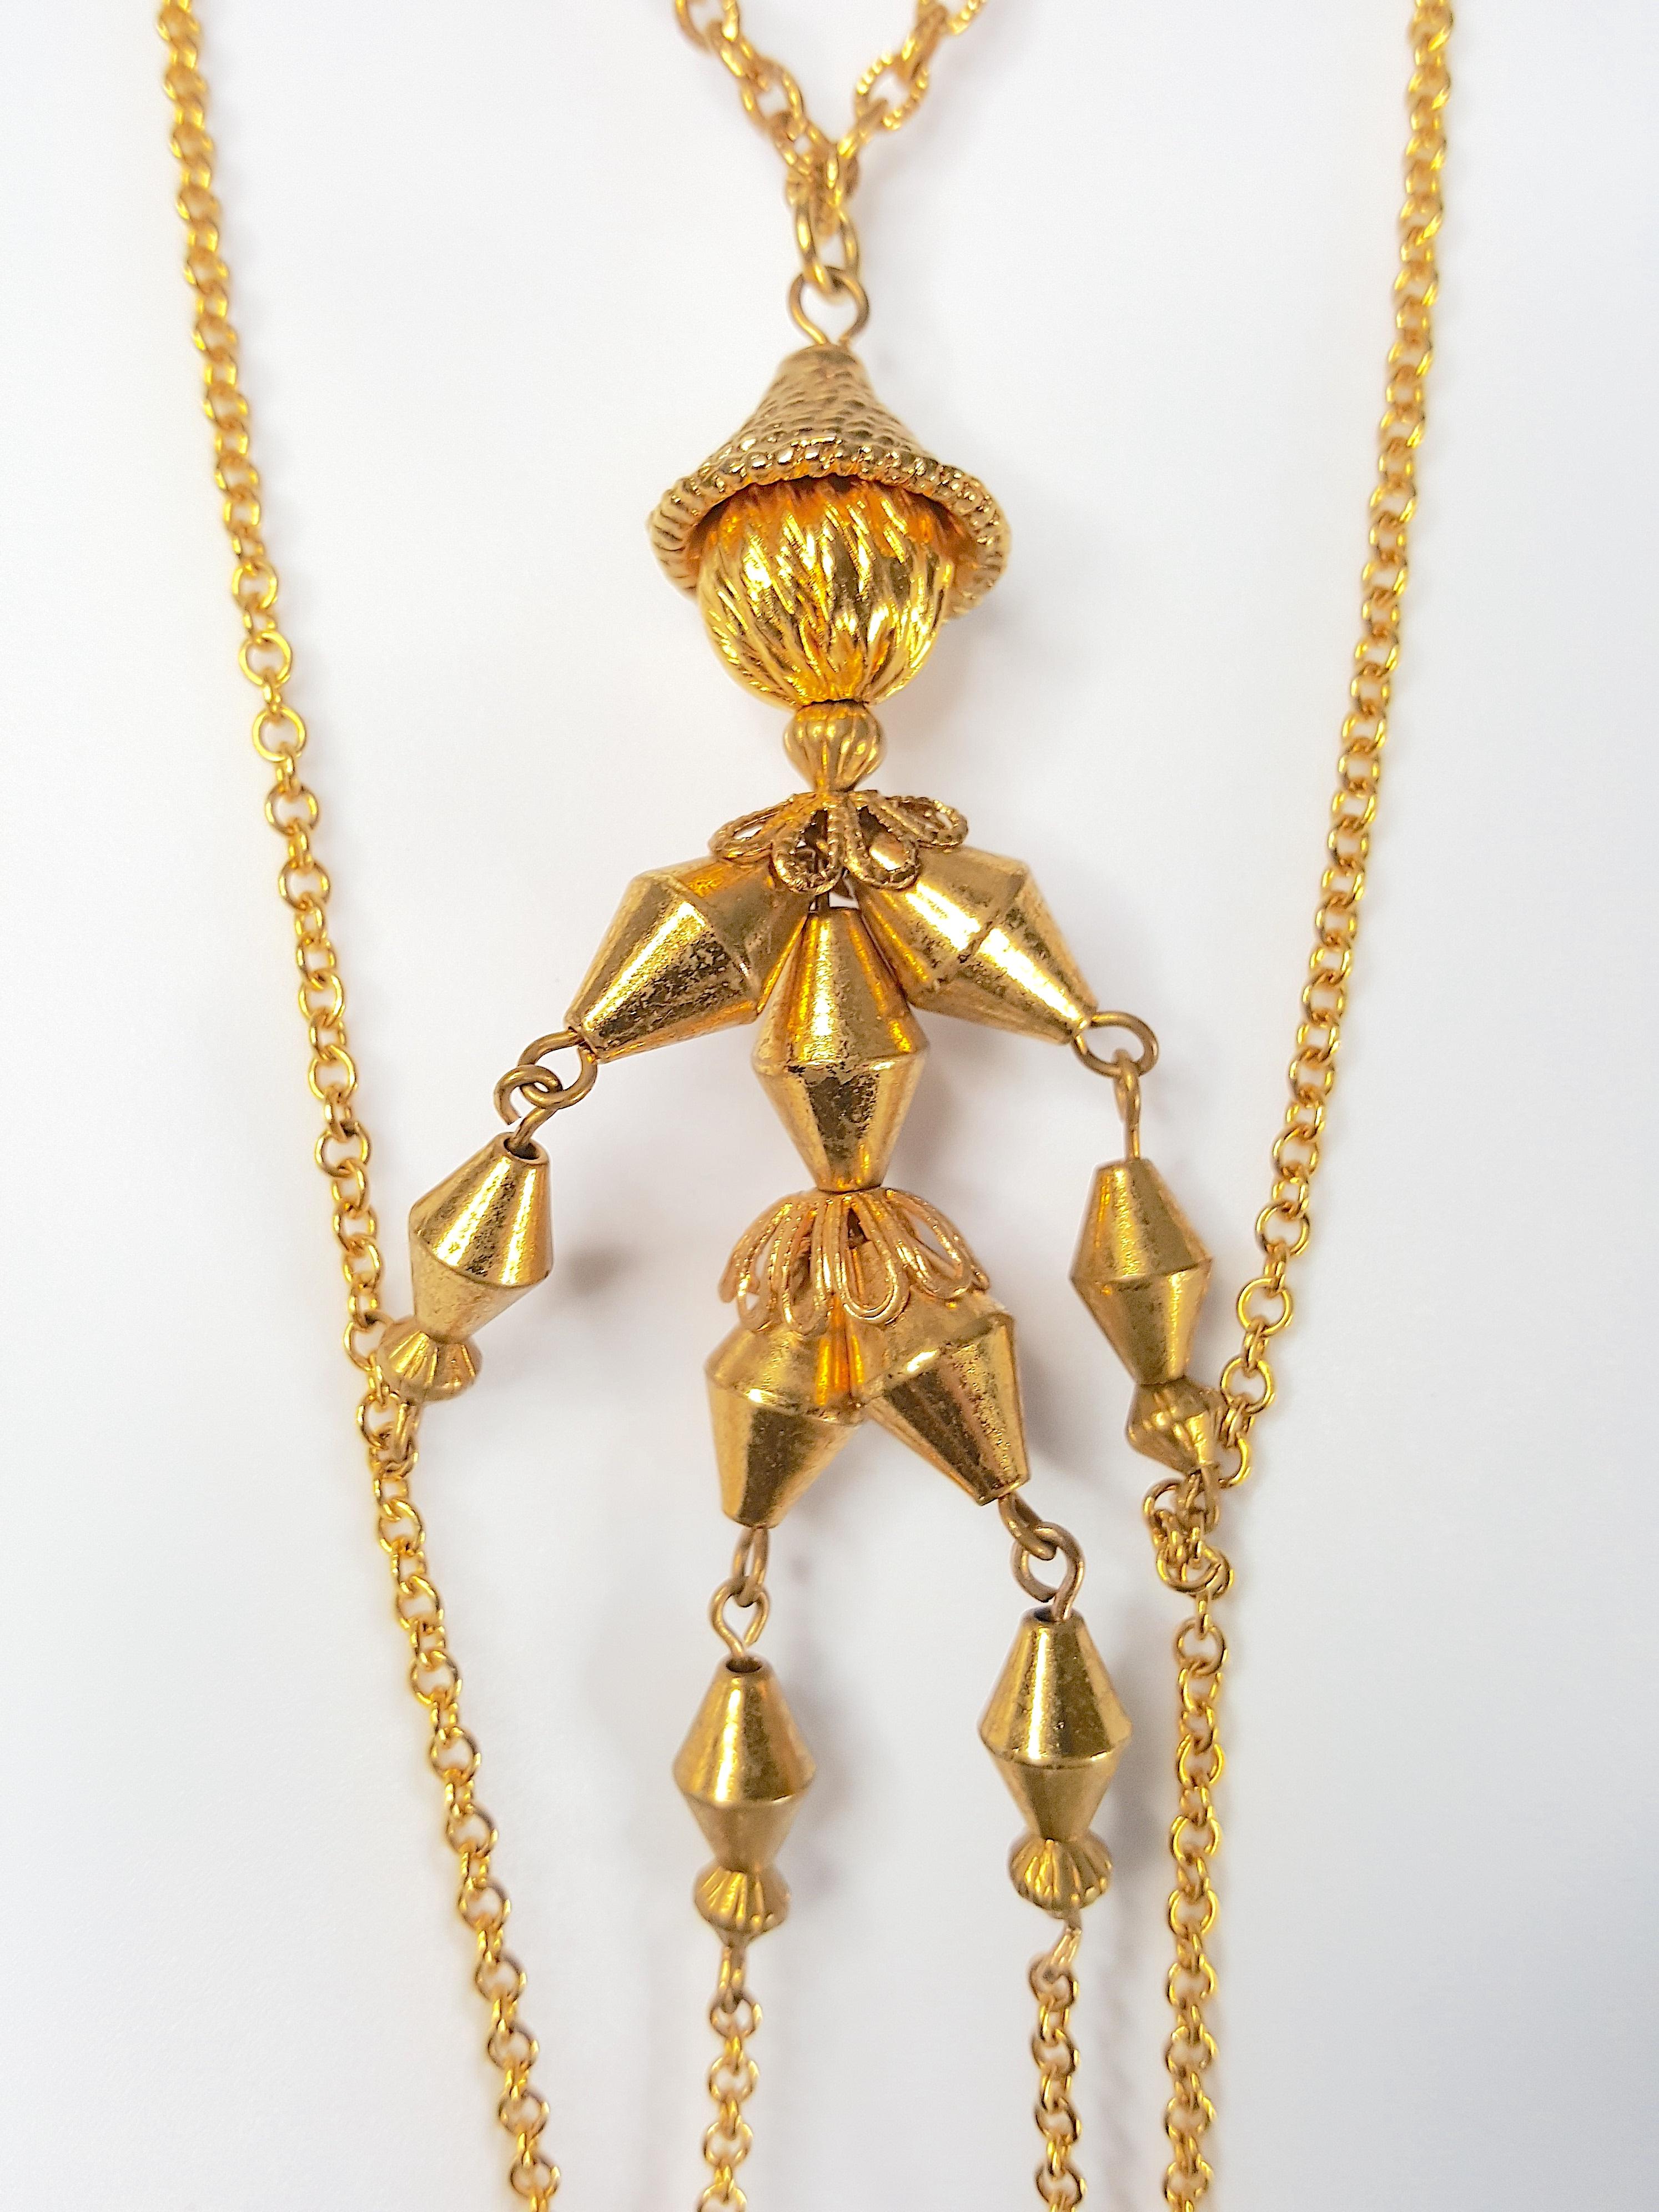 Artisan KineticPuppetStringsPinocchio GoldTexturedChainLink3Strand Early20thC. Necklace For Sale